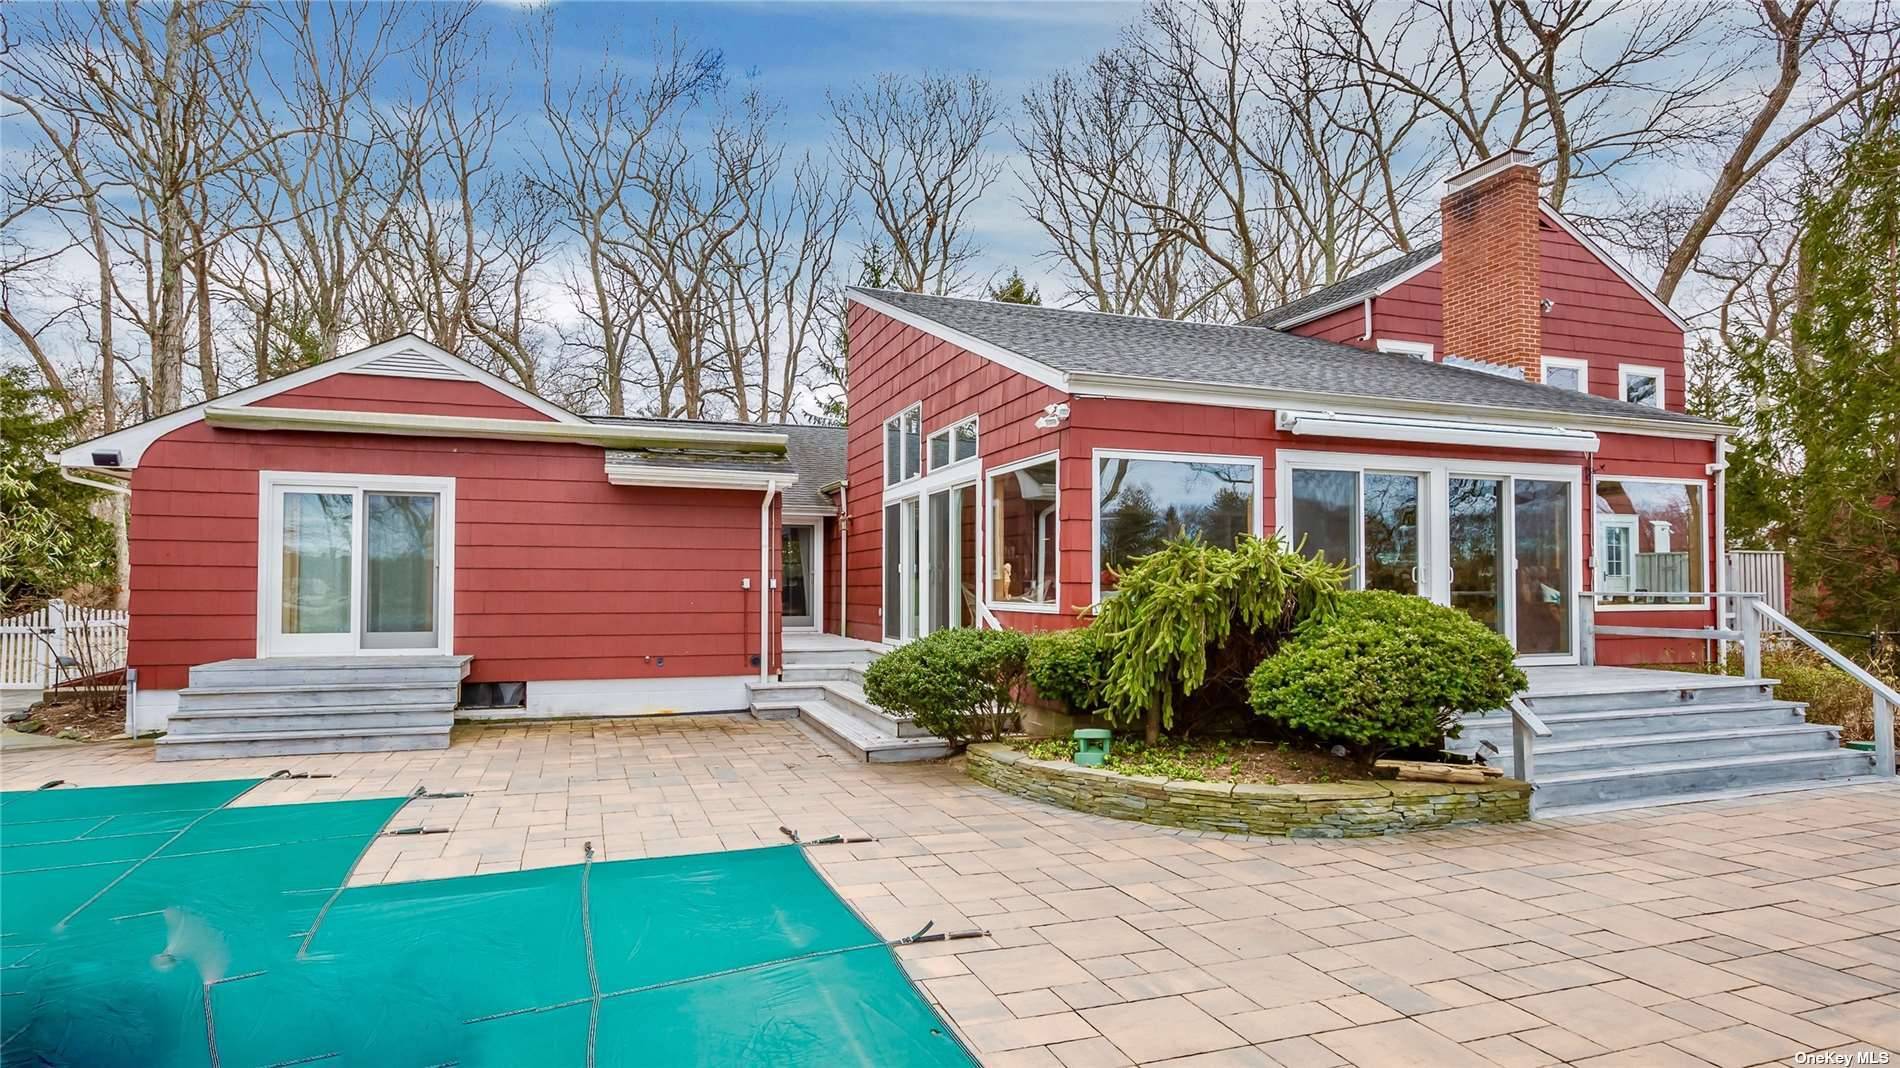 This fabulous North Fork waterfront setting features a heated waterside saltwater pool, hot tub, fire pit, dock and charming private beach area.